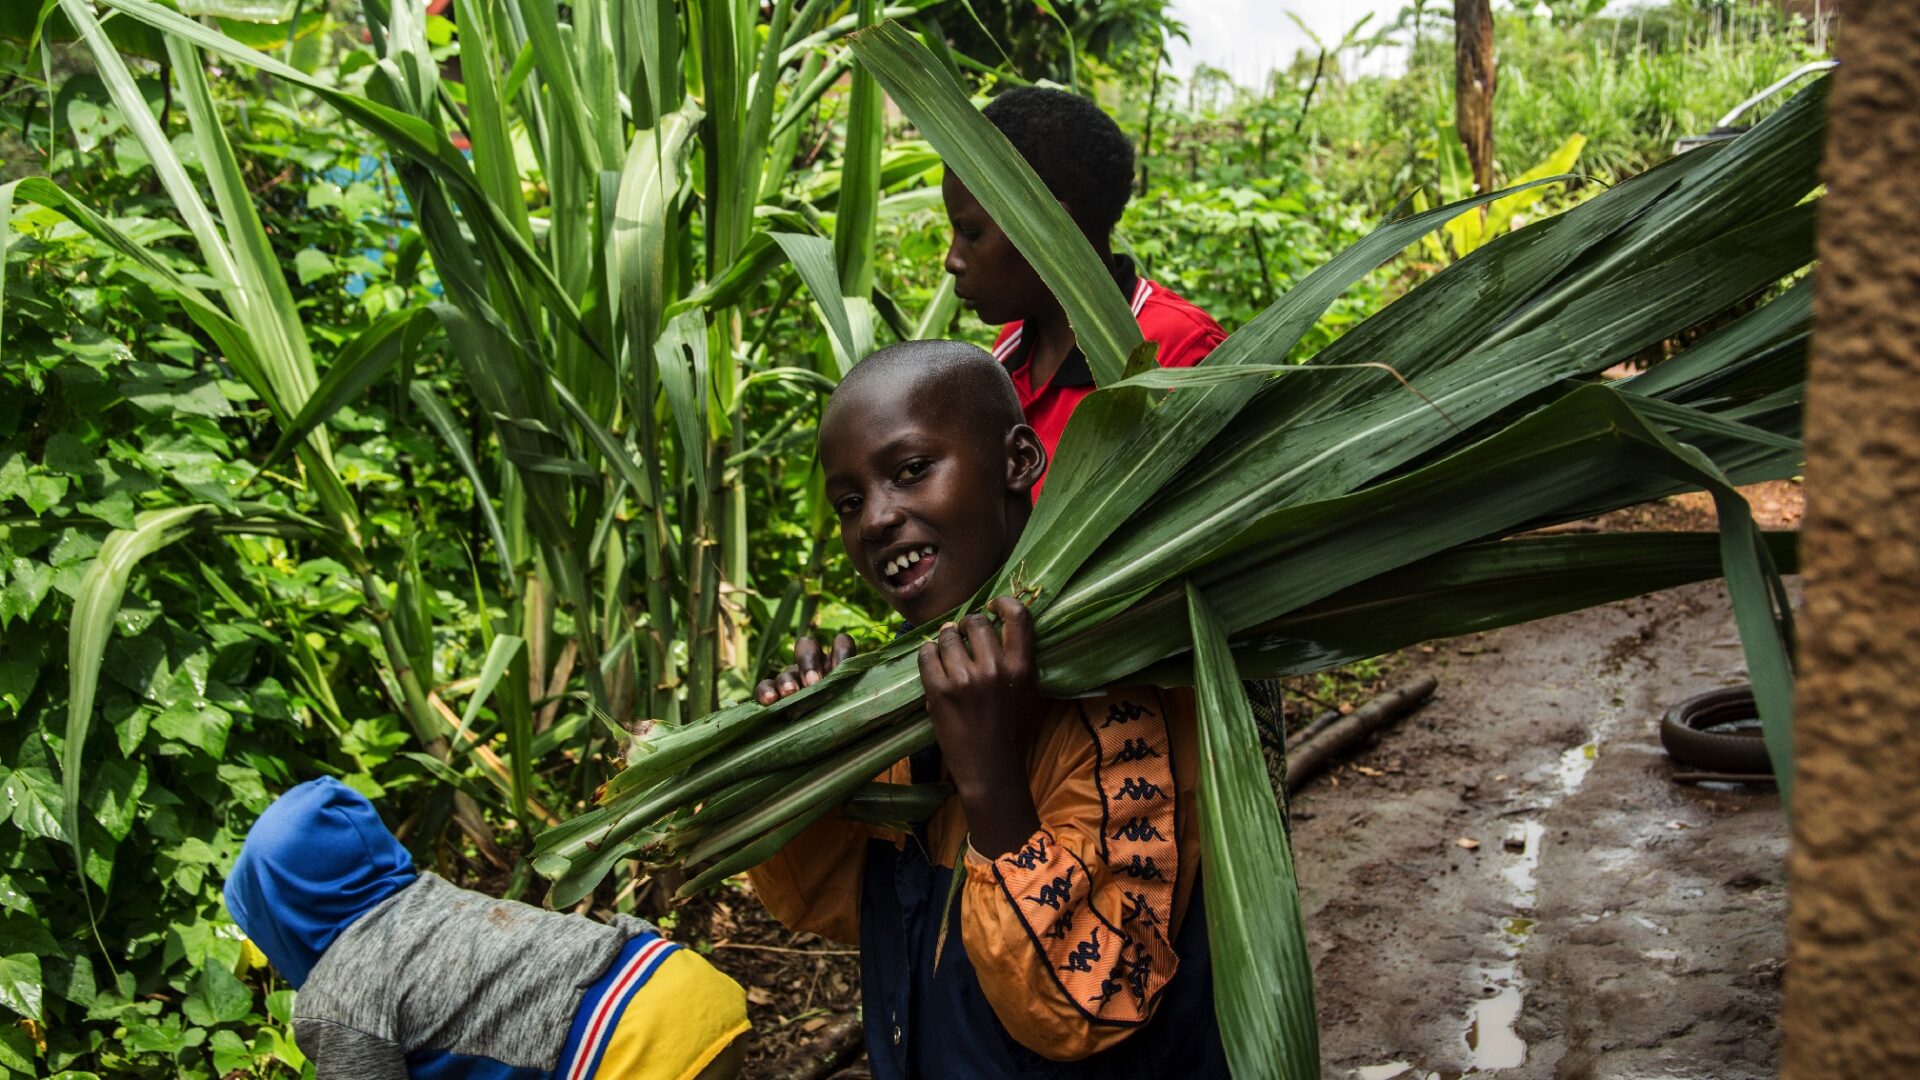 A Rwandan girl turns to smile at the camera whilst holding long green leafy plants on her shoulder, against a backdrop of the same crop